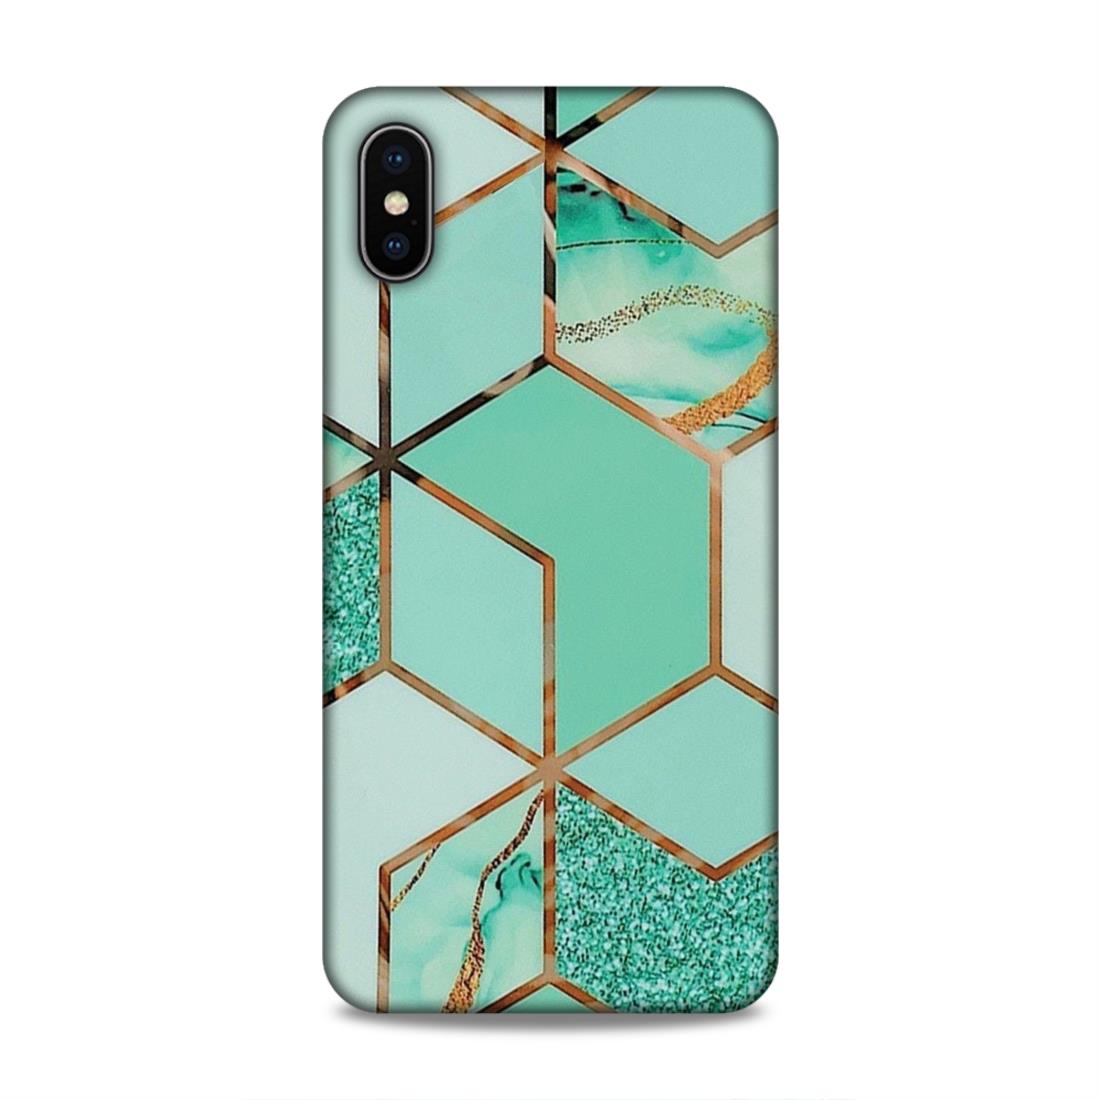 Hexagonal Marble Pattern Hard Back Case For Apple iPhone XS Max